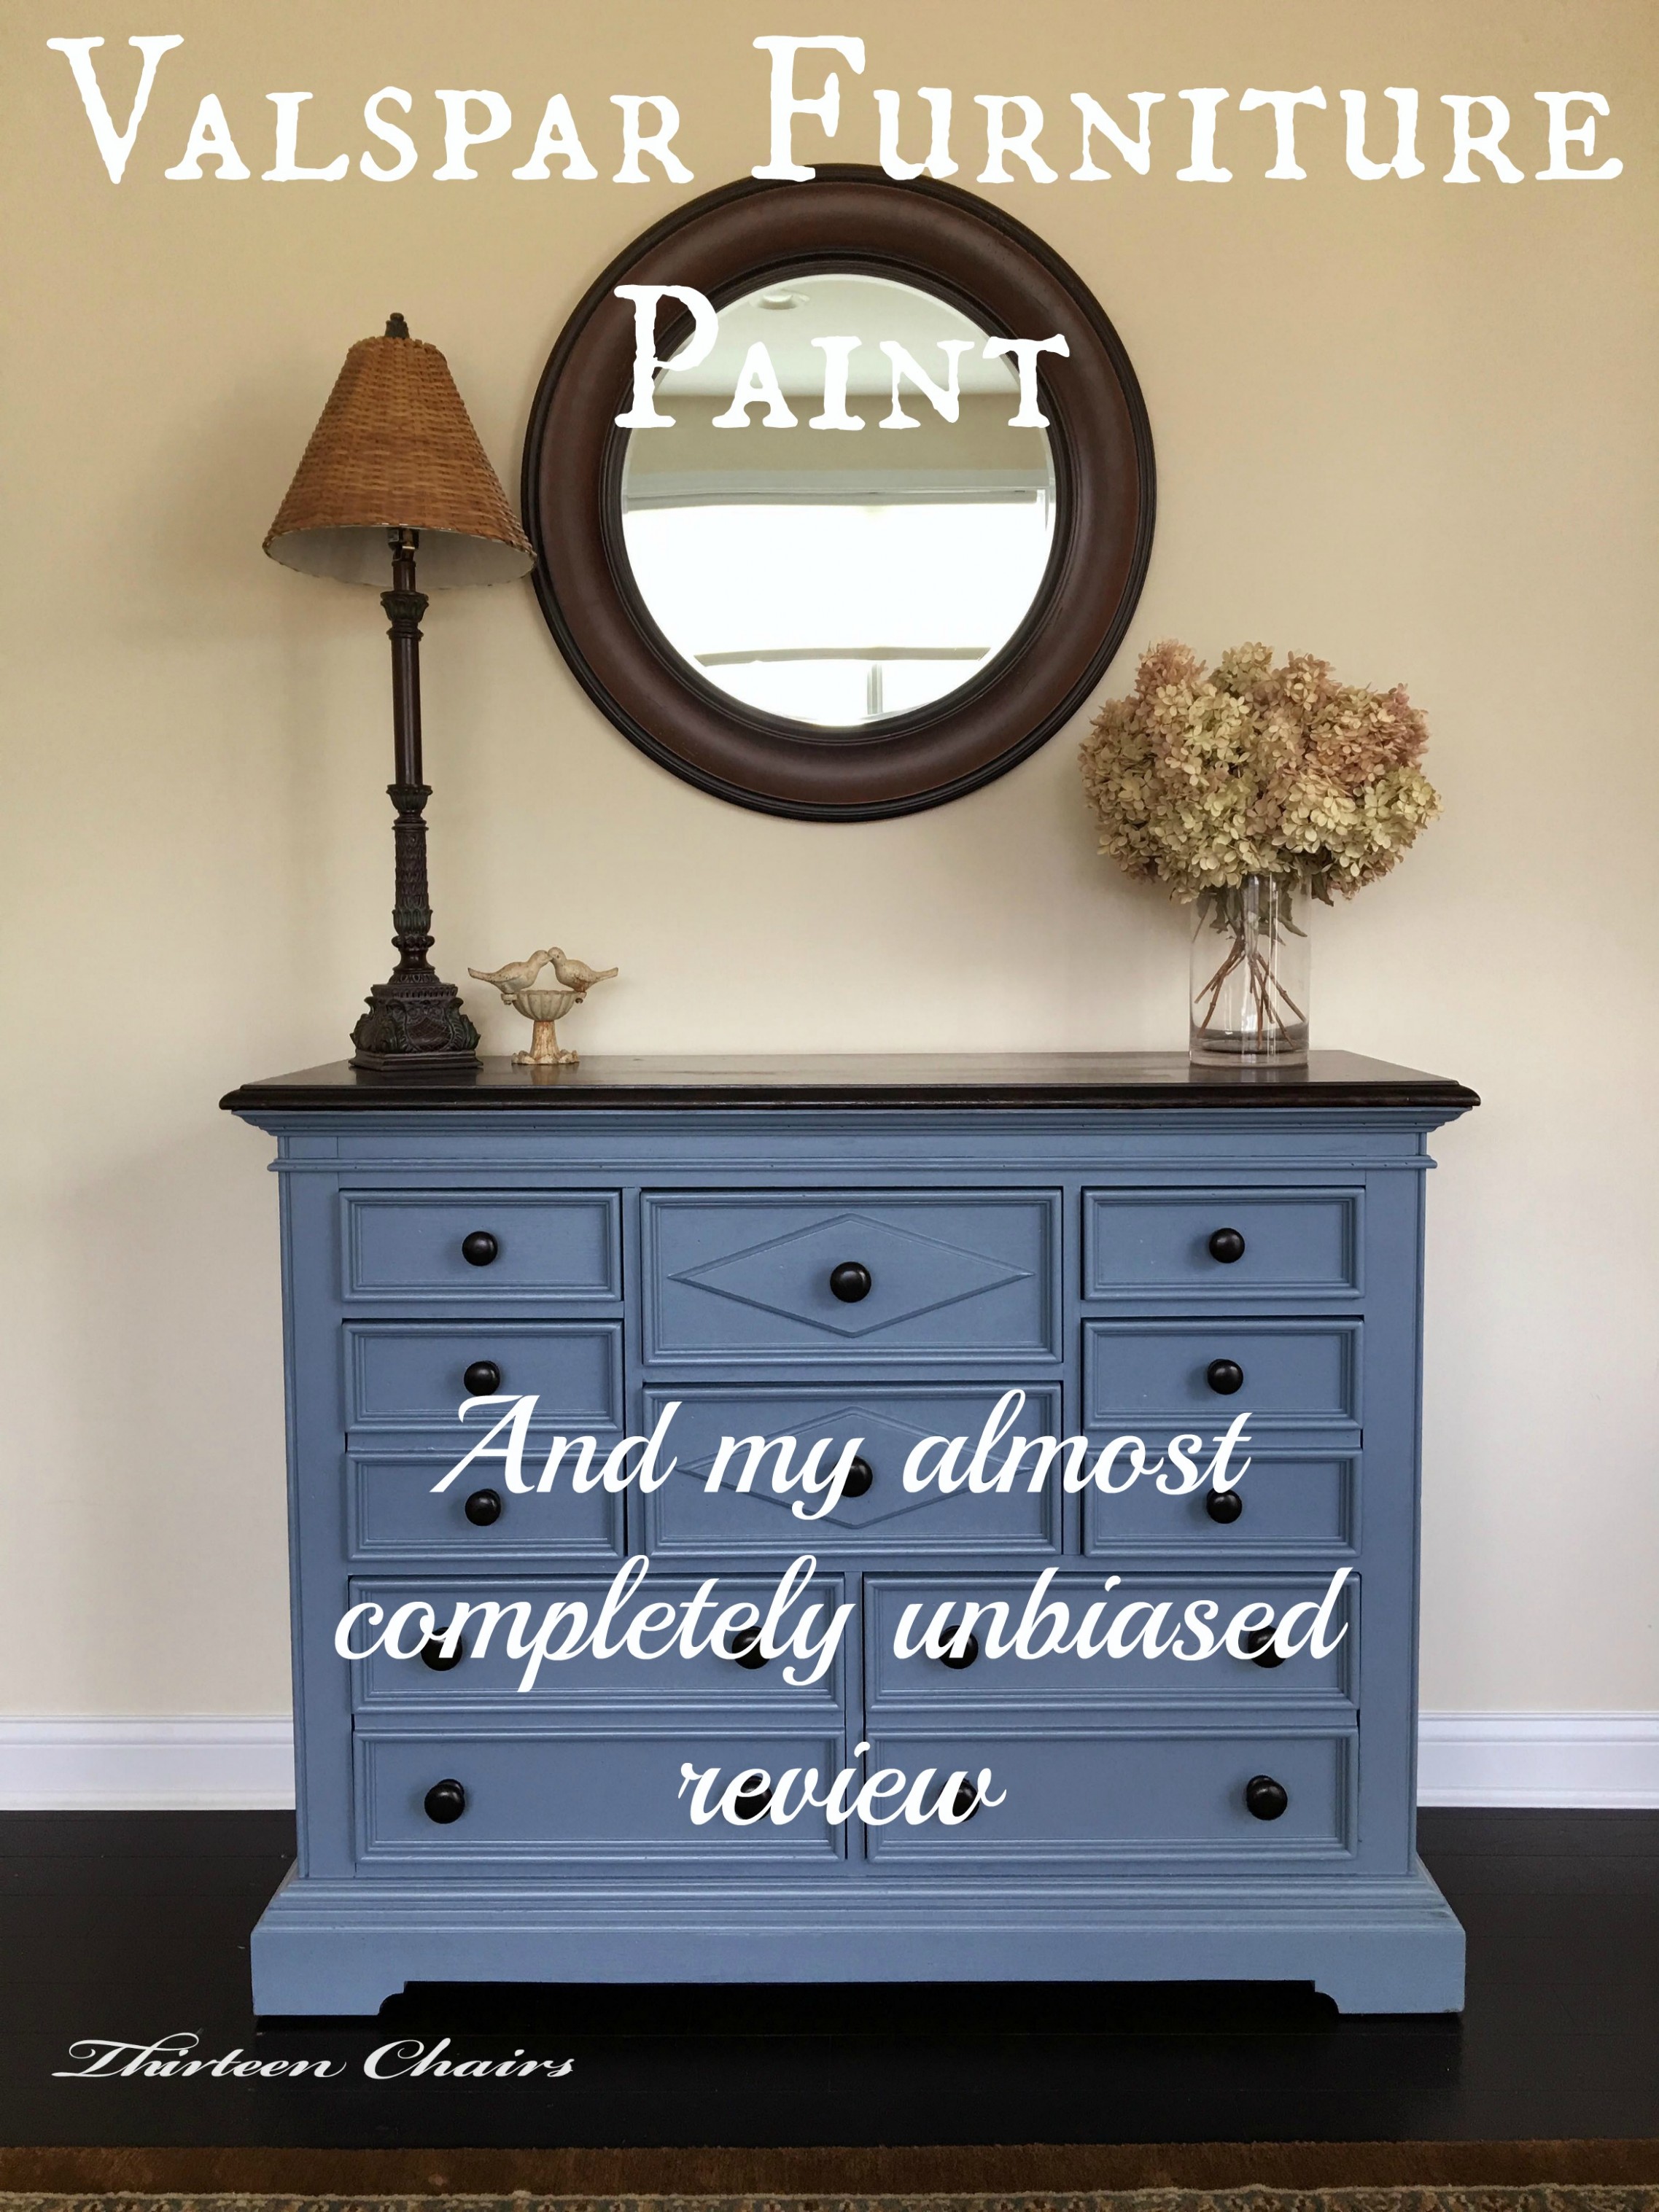 Painting With Valspar Furniture Paint Can You Use Acrylic Paint Over Chalk Paint